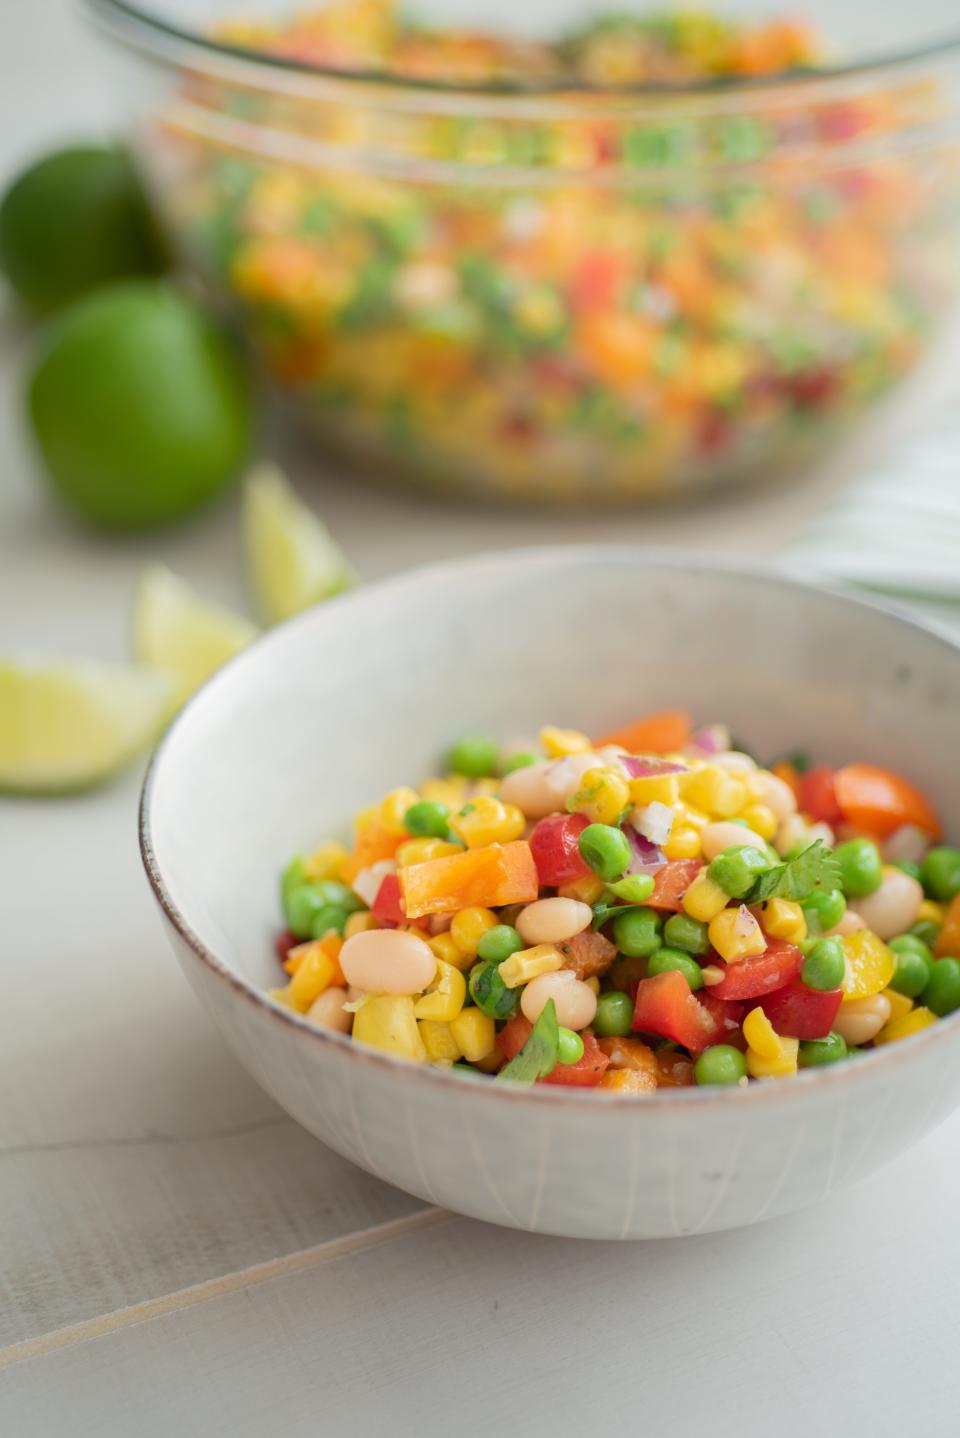 Confetti Salad with Lime-Cilantro Dressing includes peas, corn, beans and red, yellow and orange bell peppers.